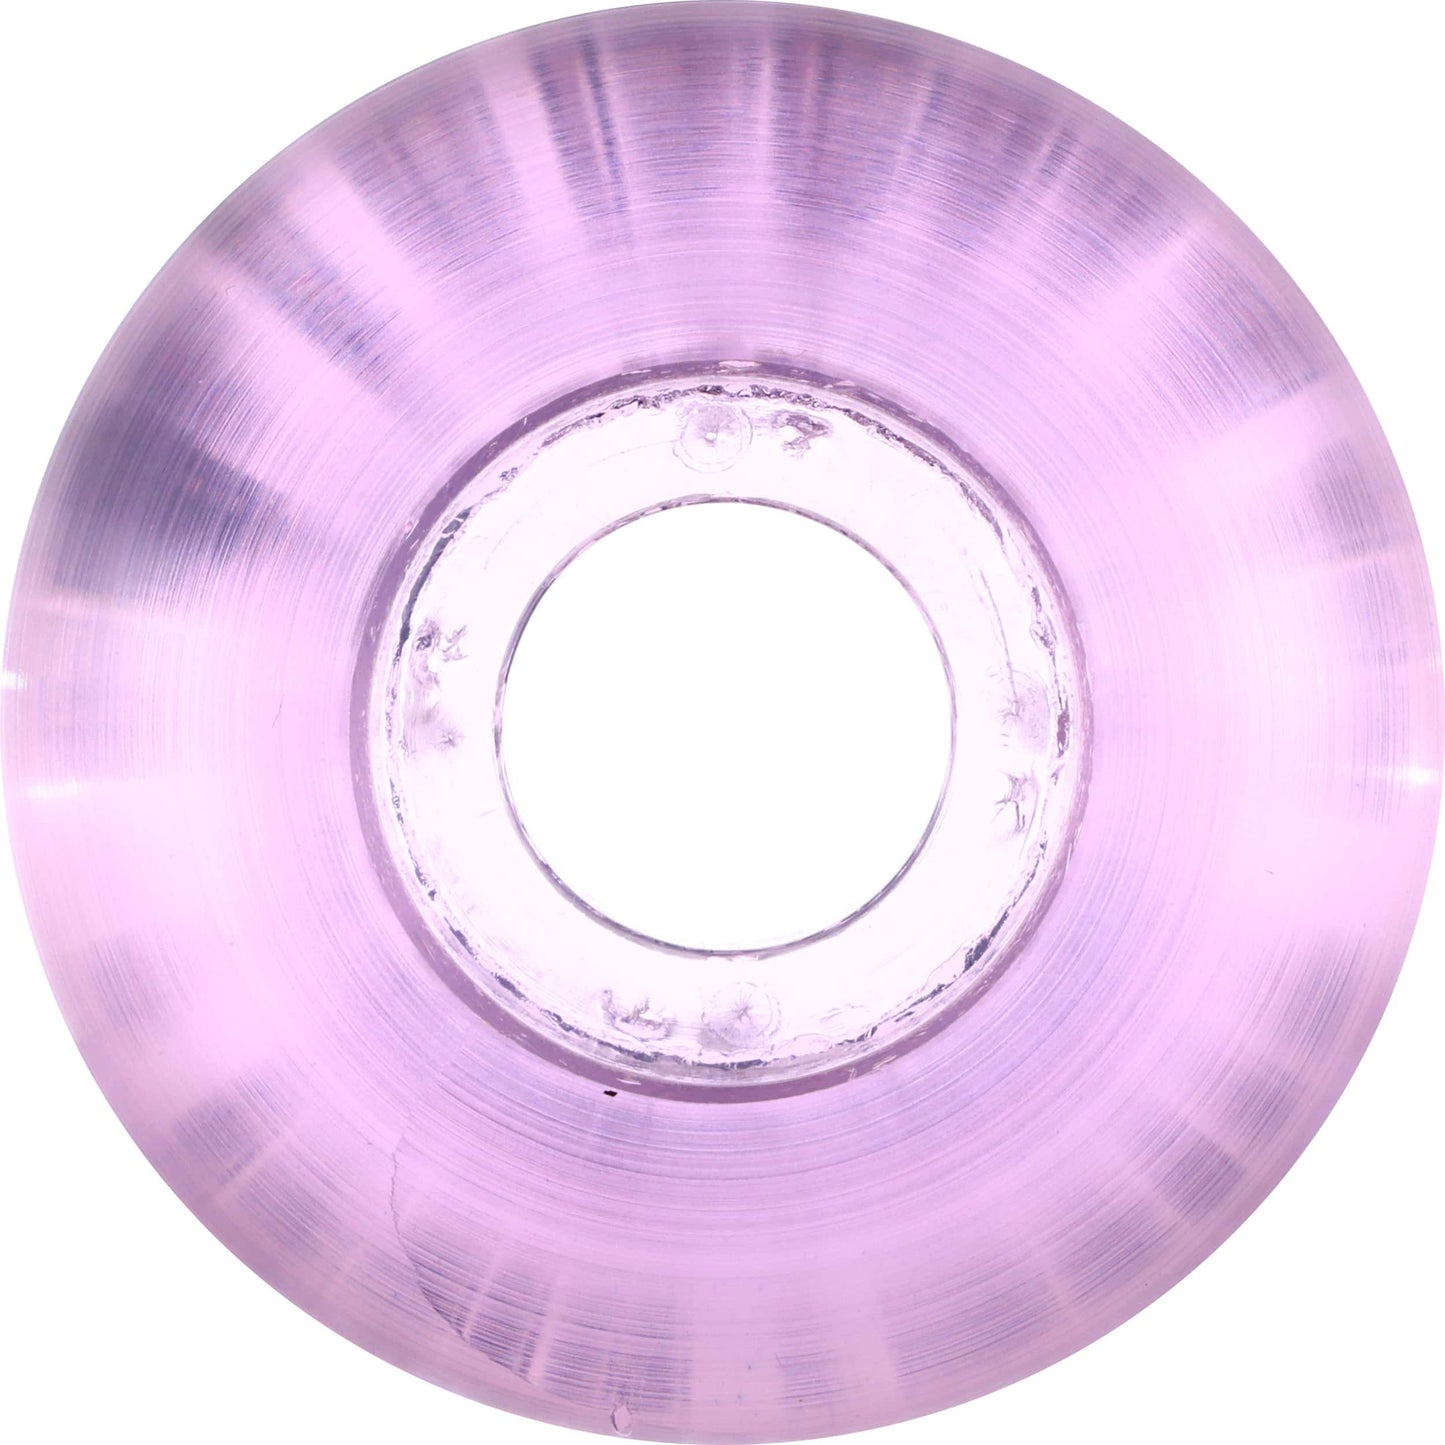 SNOT LIL BOOGER CLEAR PURPLE WHEEL 45MM 101A